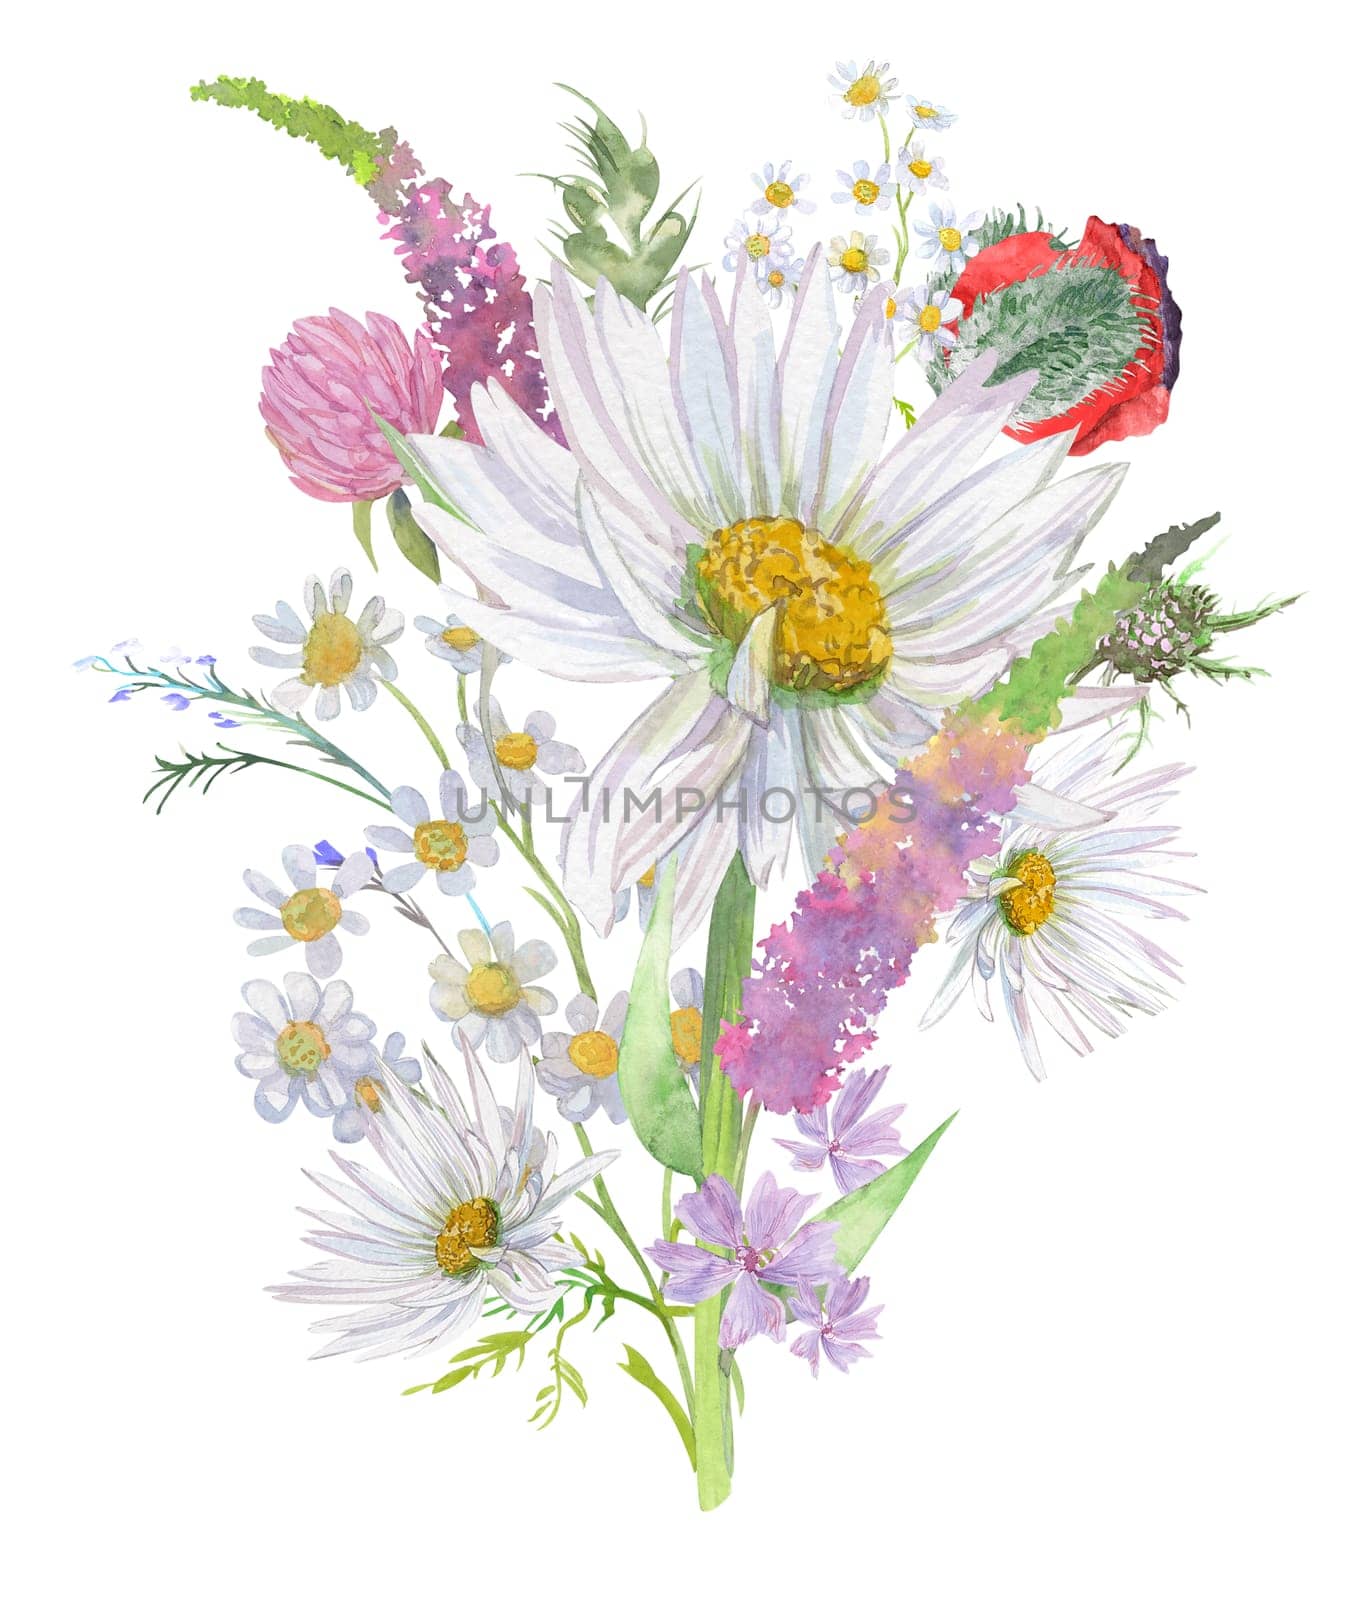 Bouquet of flowers with daisies and herbs isolated on white background